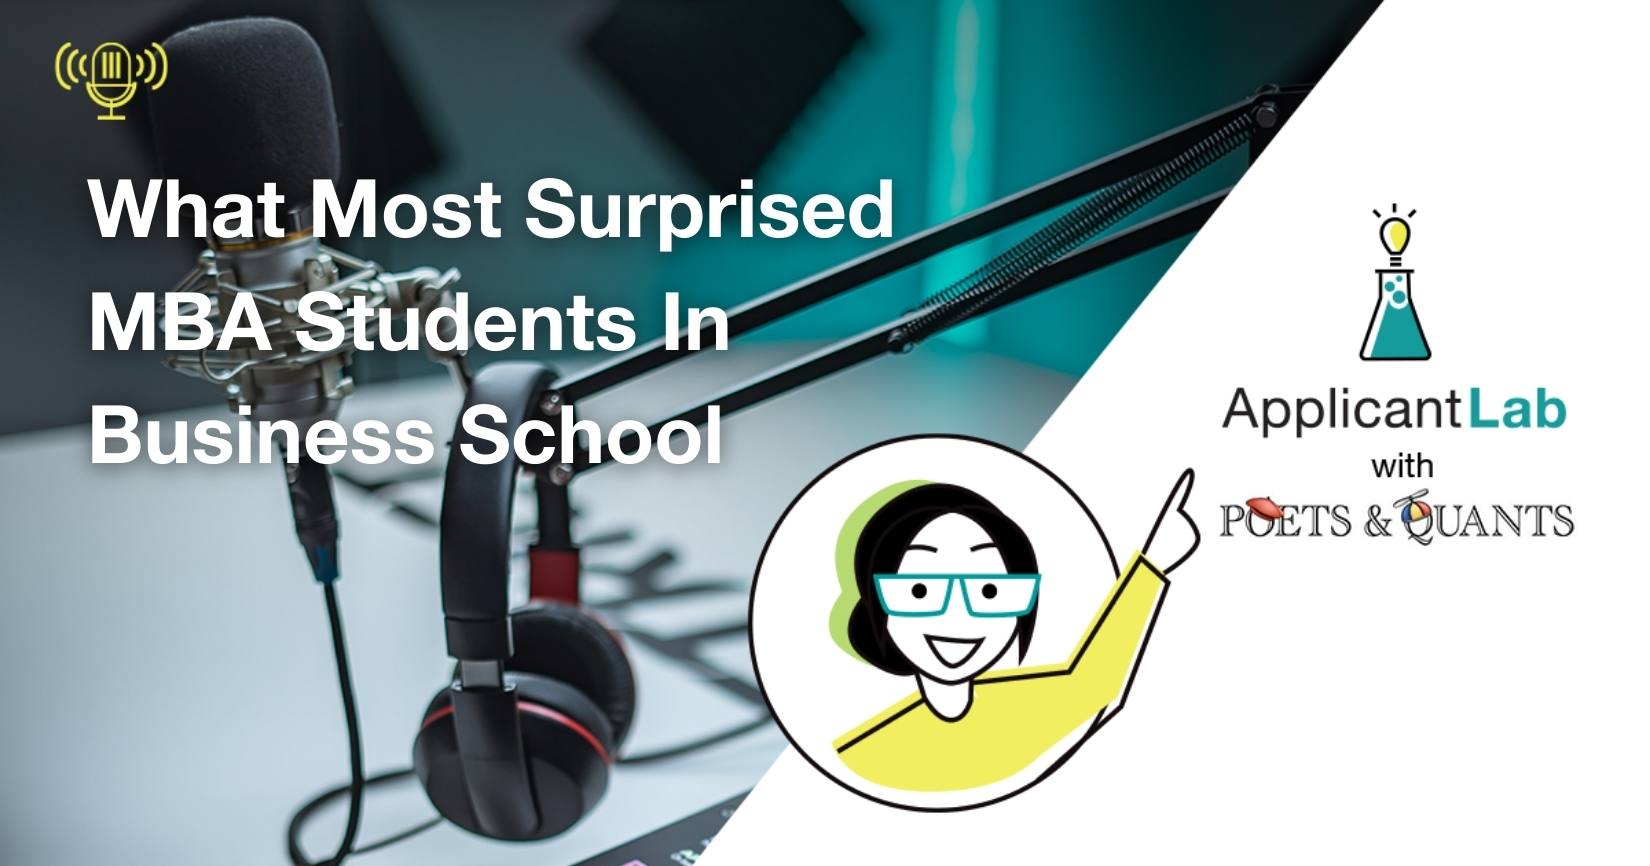 What Most Surprised MBA Students In Business School